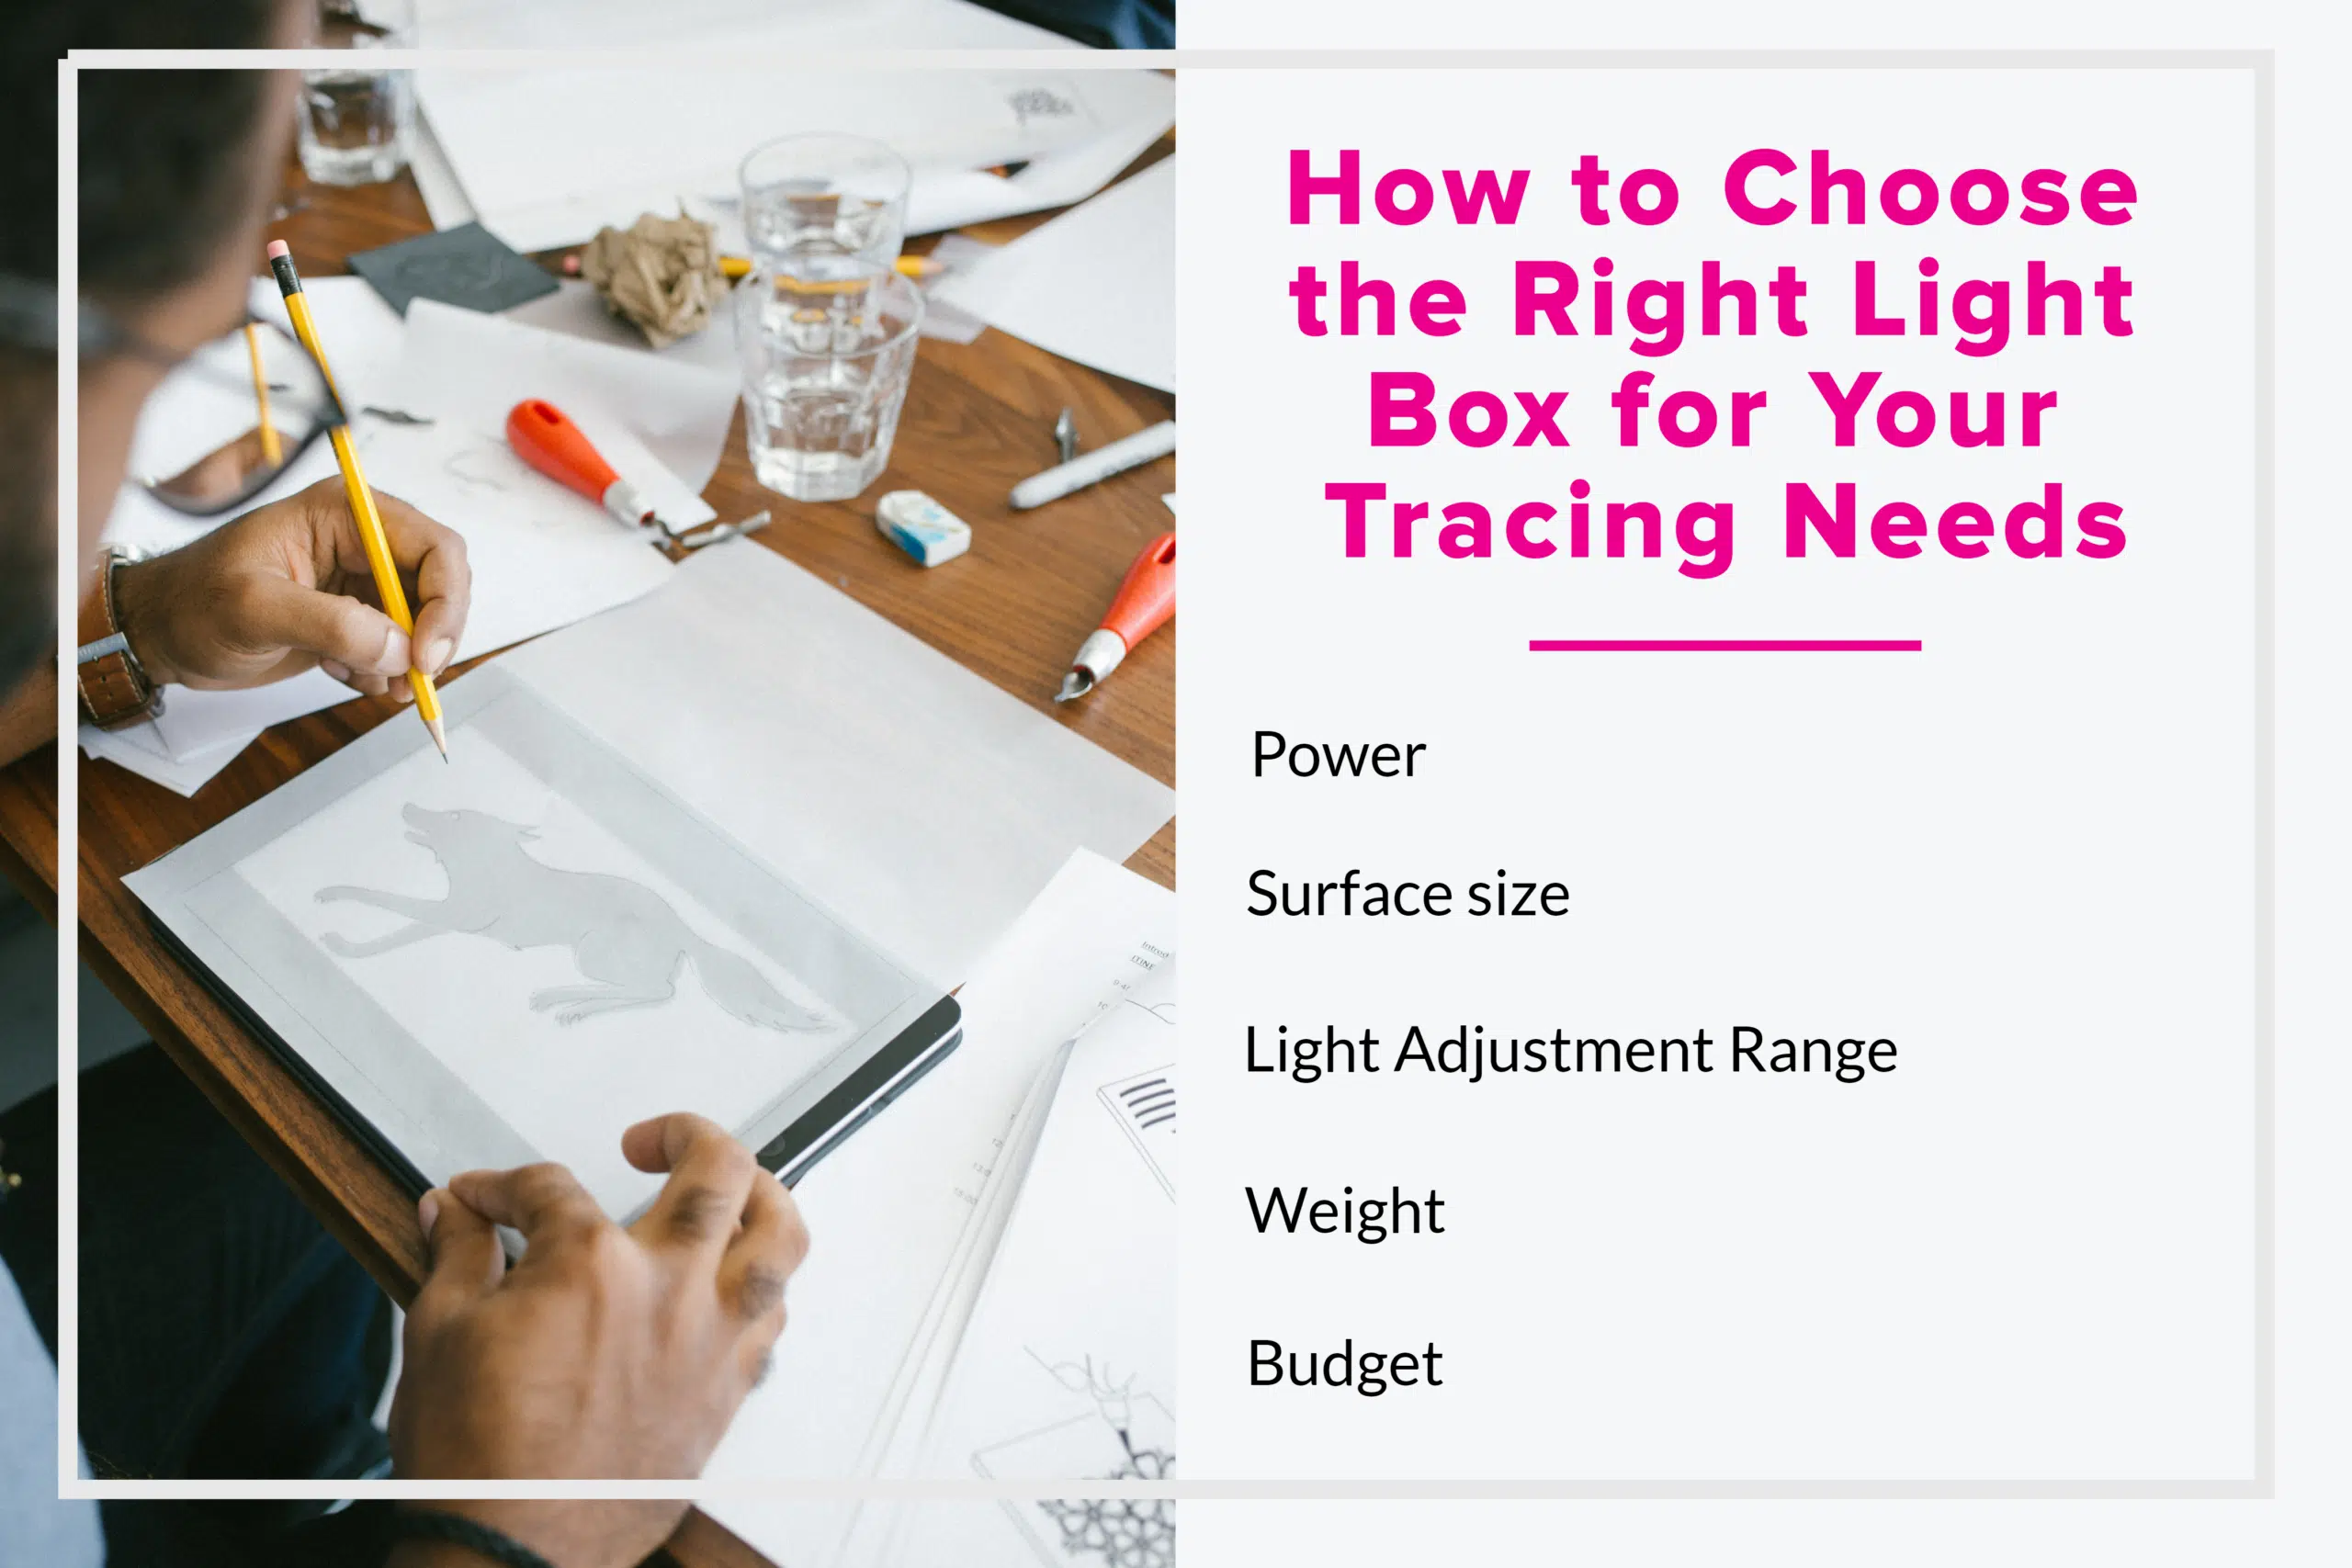 How to Choose the Right Light Box for Your Tracing Needs